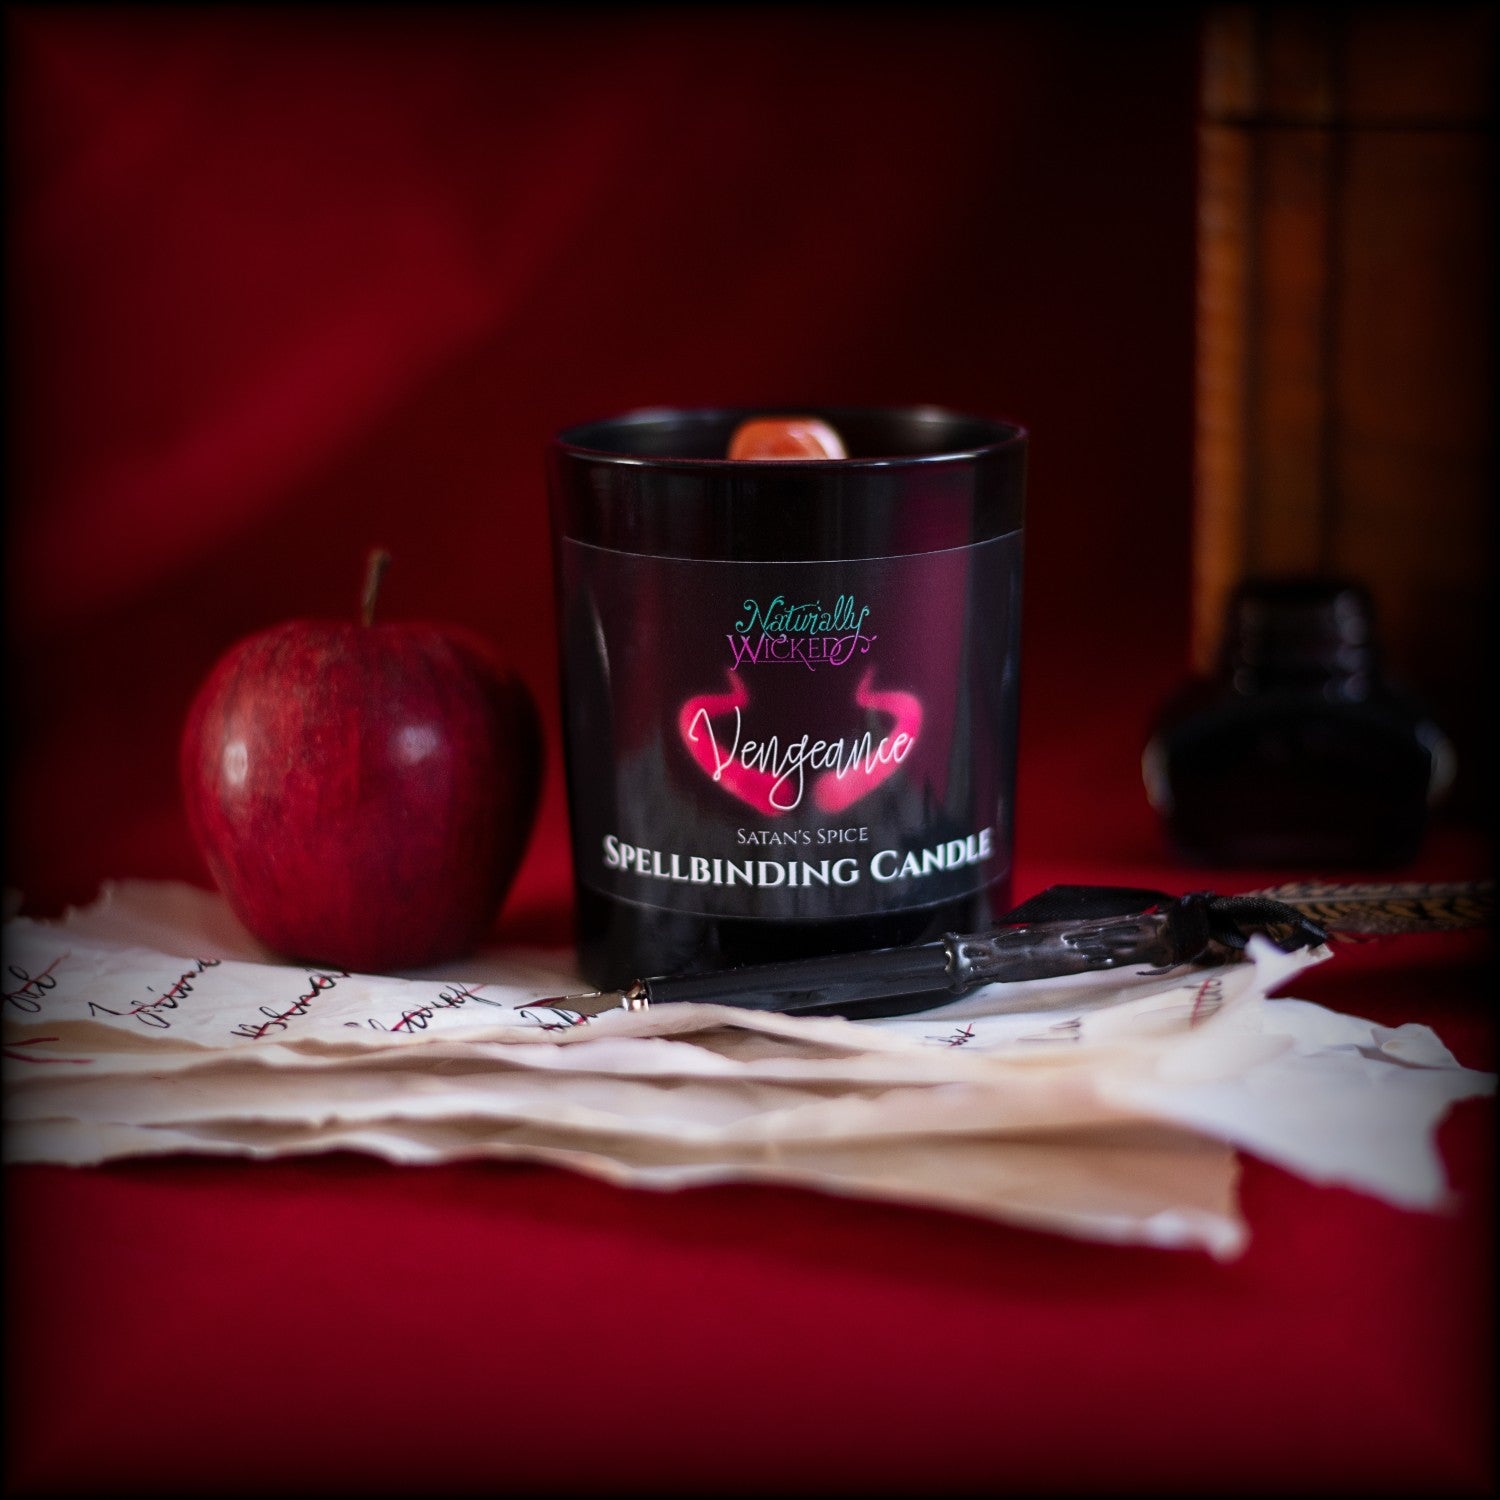 Naturally Wicked Spellbinding Vengeance Spell Candle Entombed With Carnelian Crystal Sits Amongst Revenge List & Red Apple